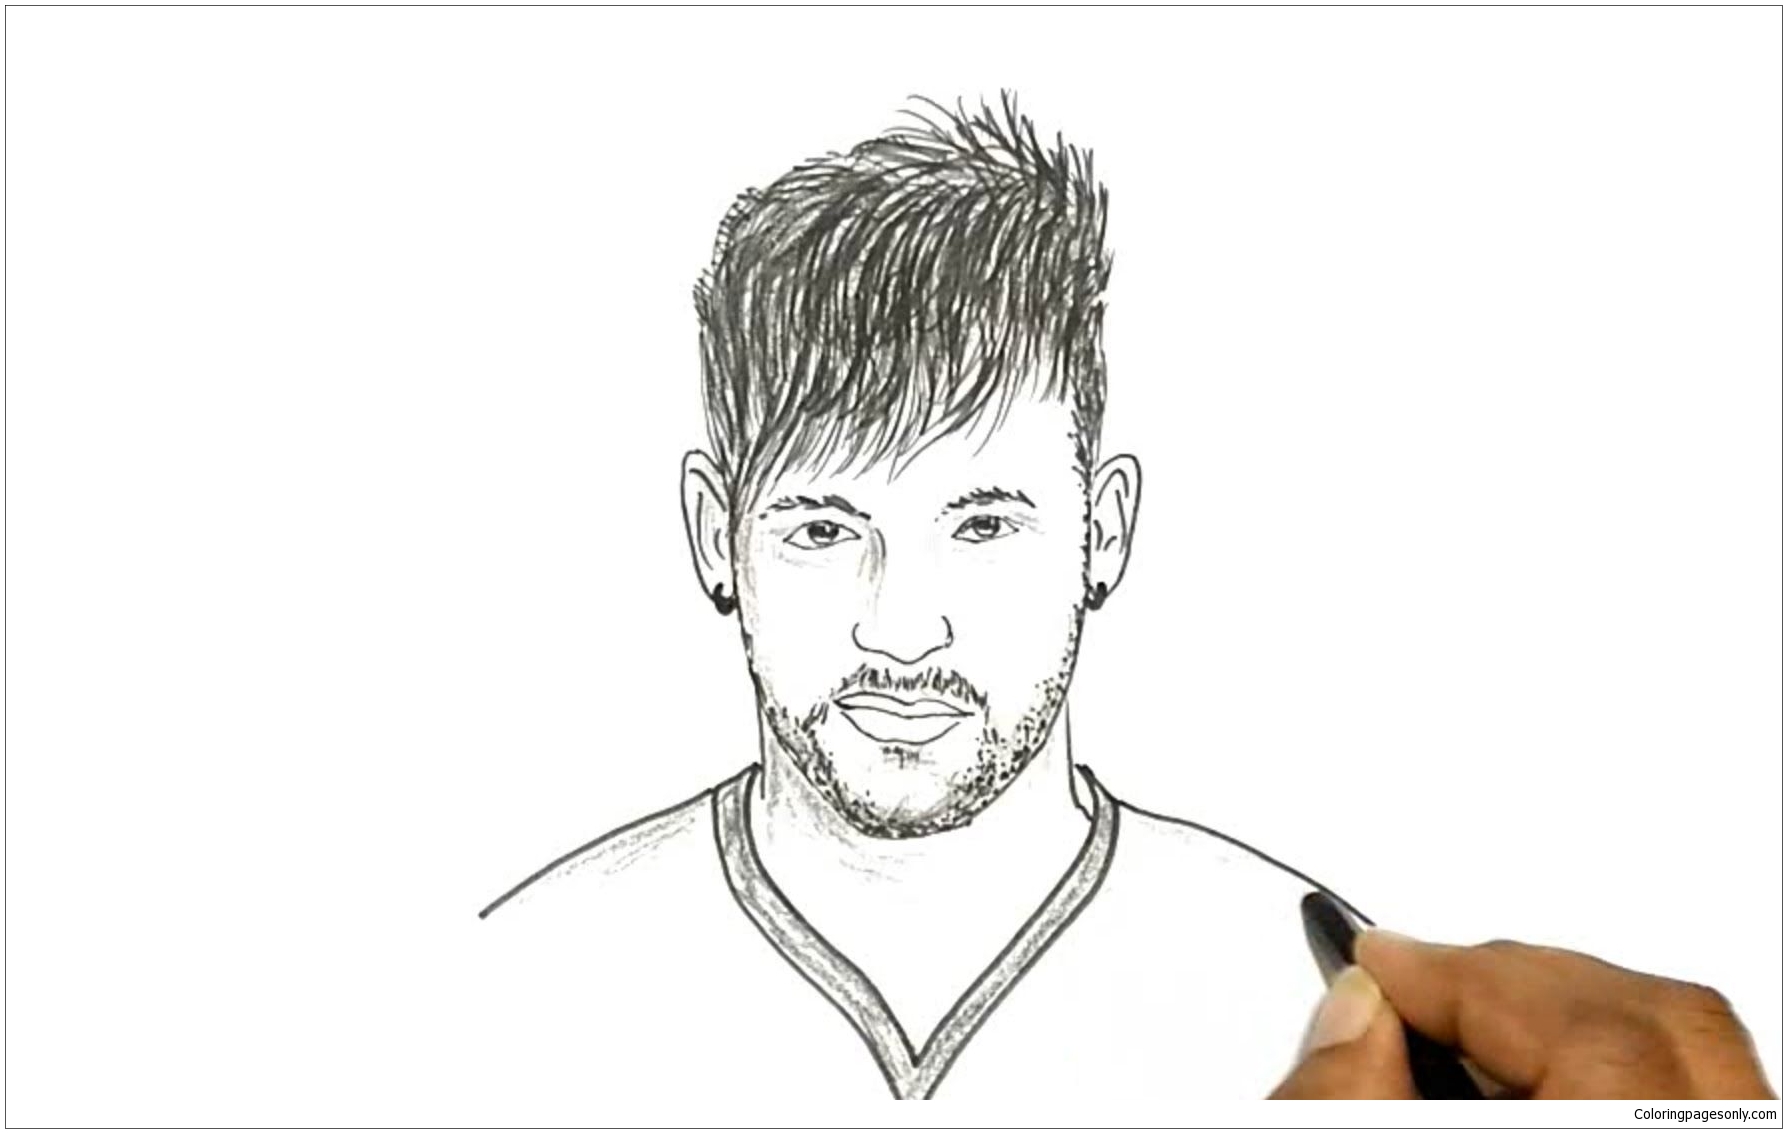 Neymar-image 13 Coloring Pages